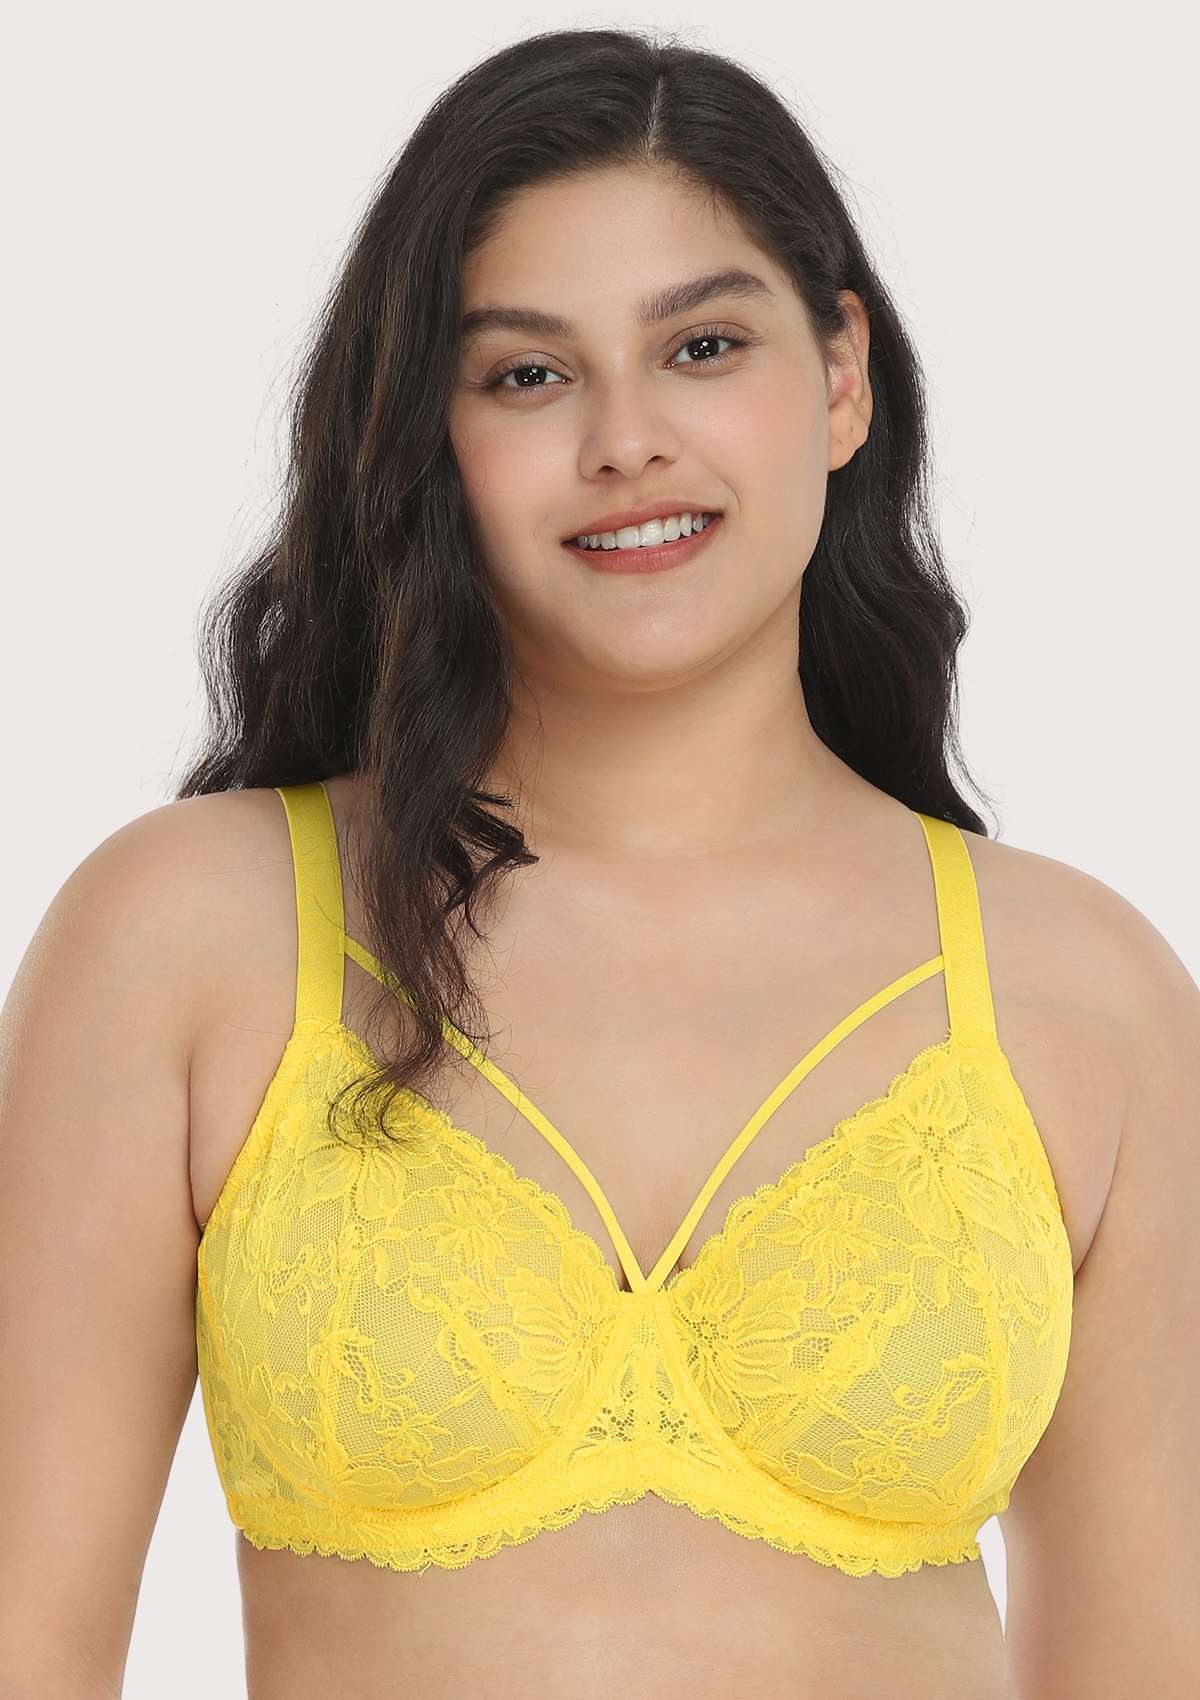 HSIA Unlined Lace Mesh Minimizer Bra For Large Breasts, Full Coverage - Bright Green / 34 / C